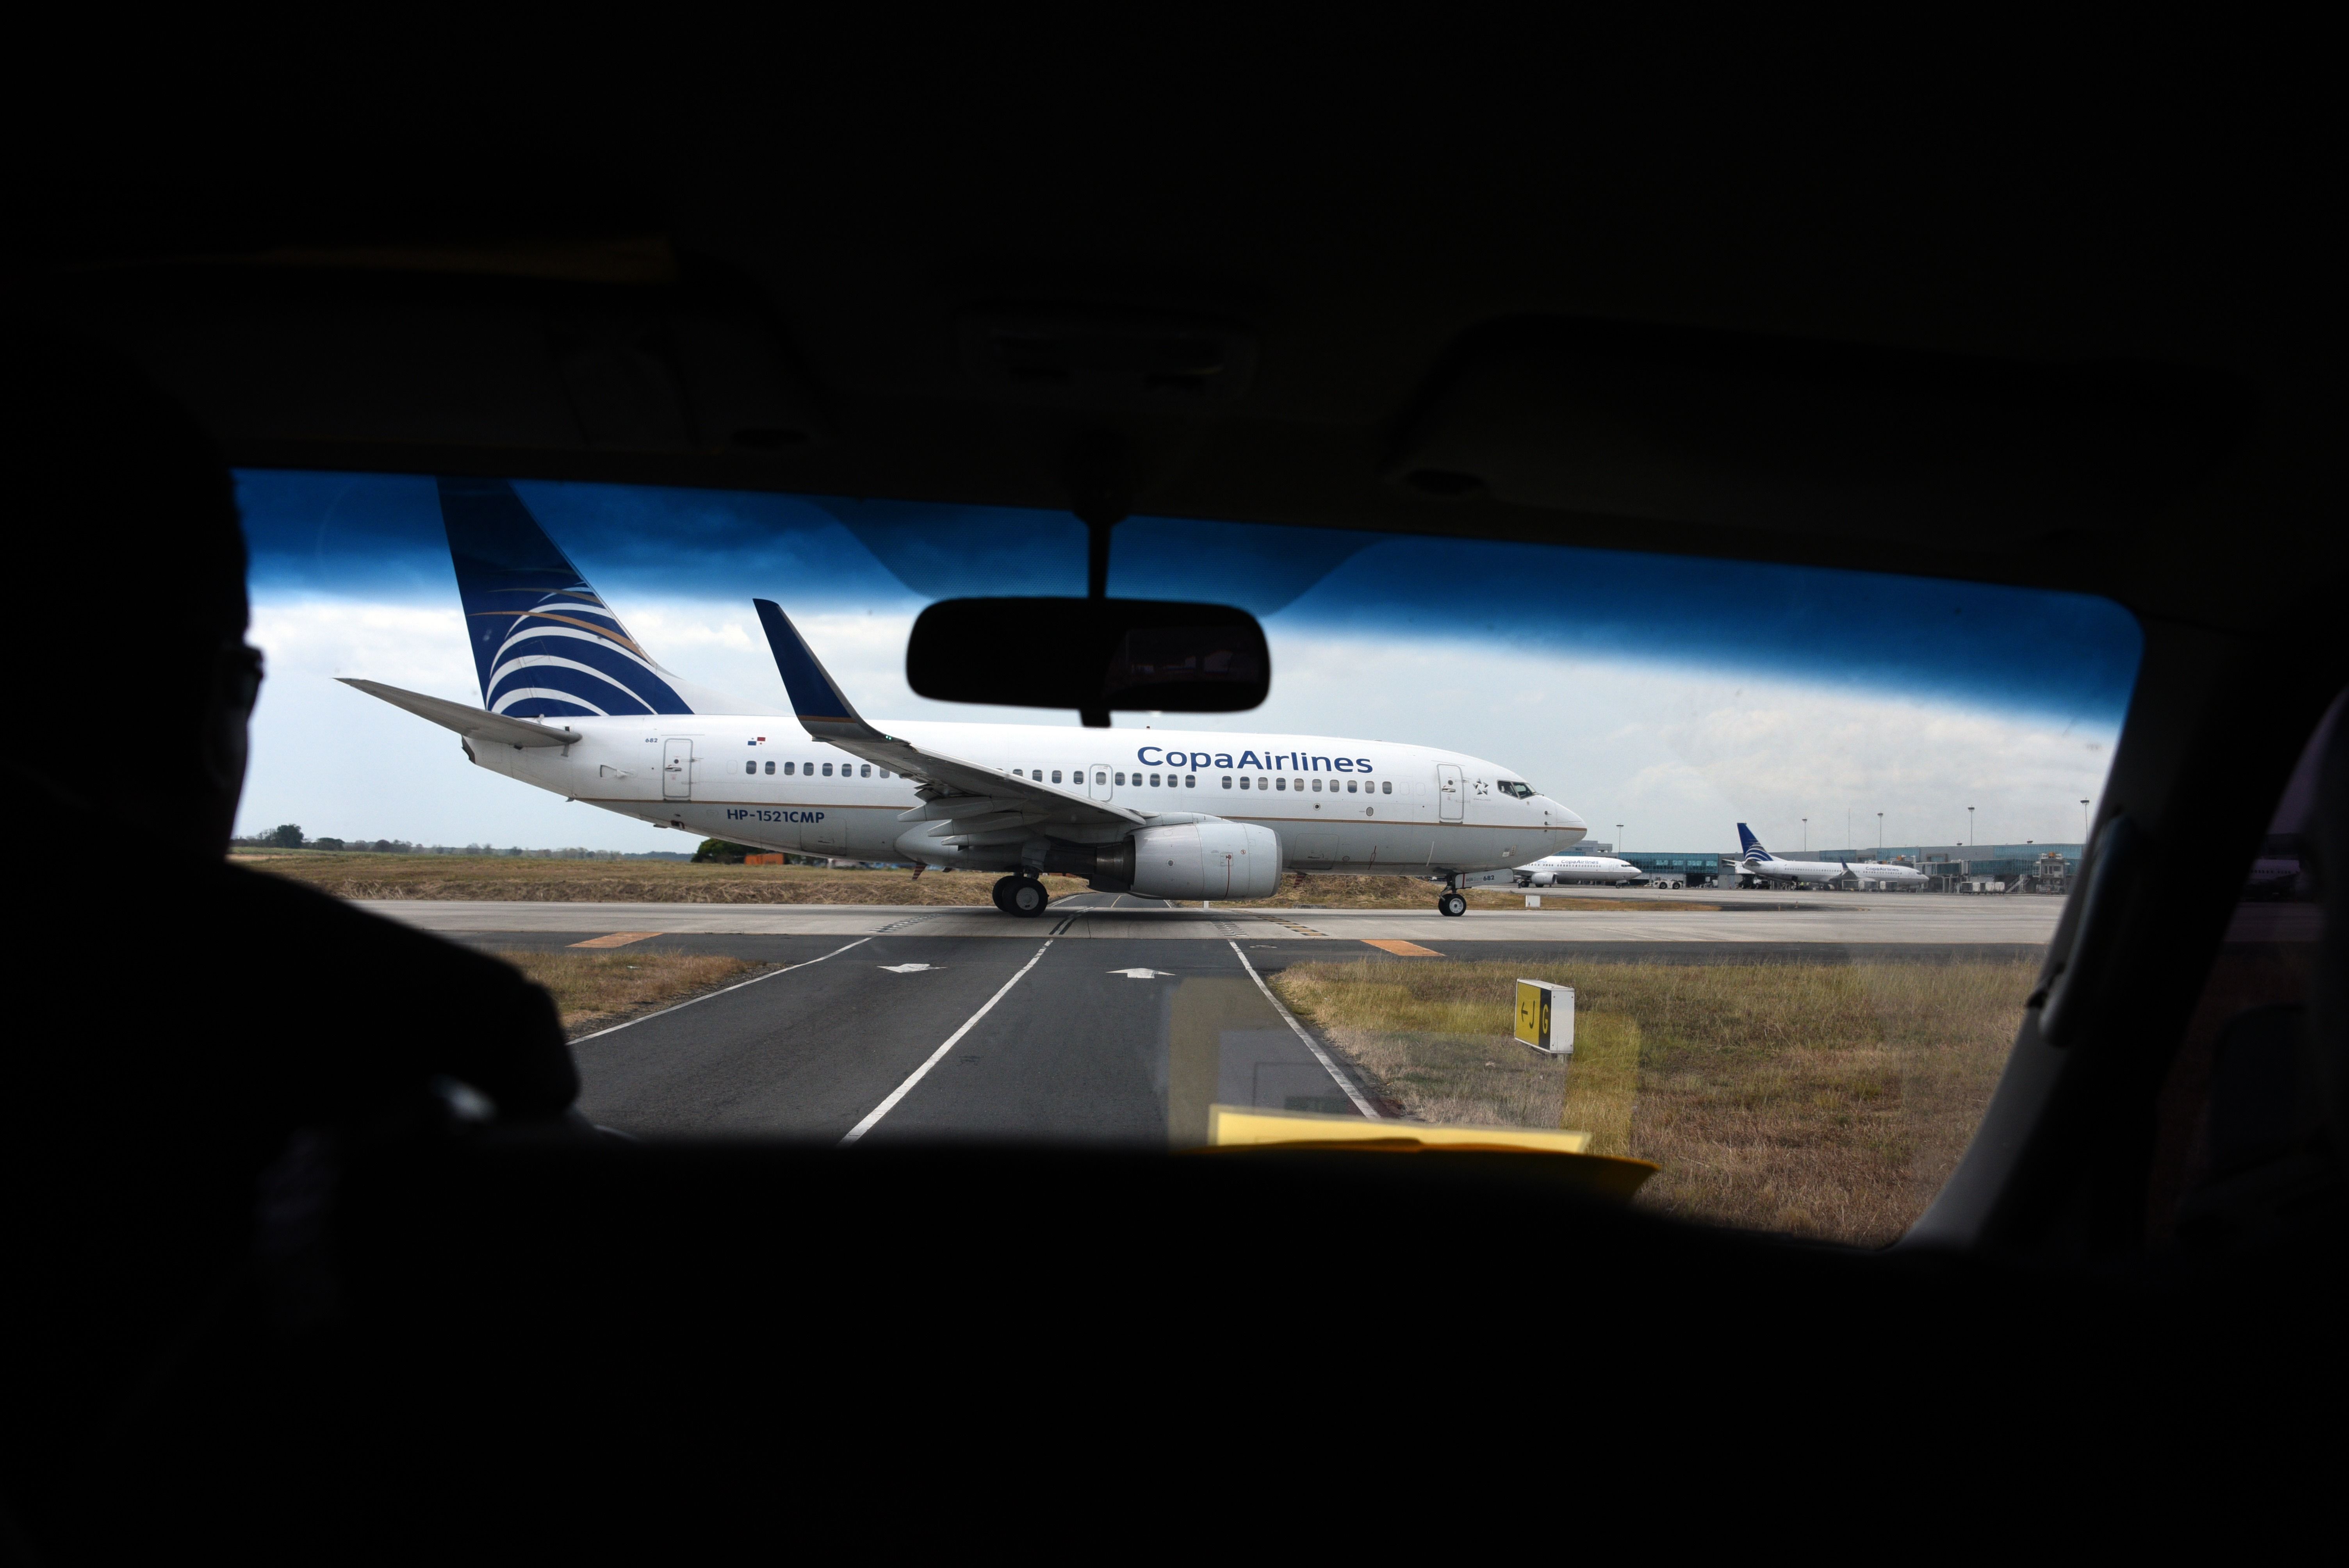 A Copa Airlines aircraft